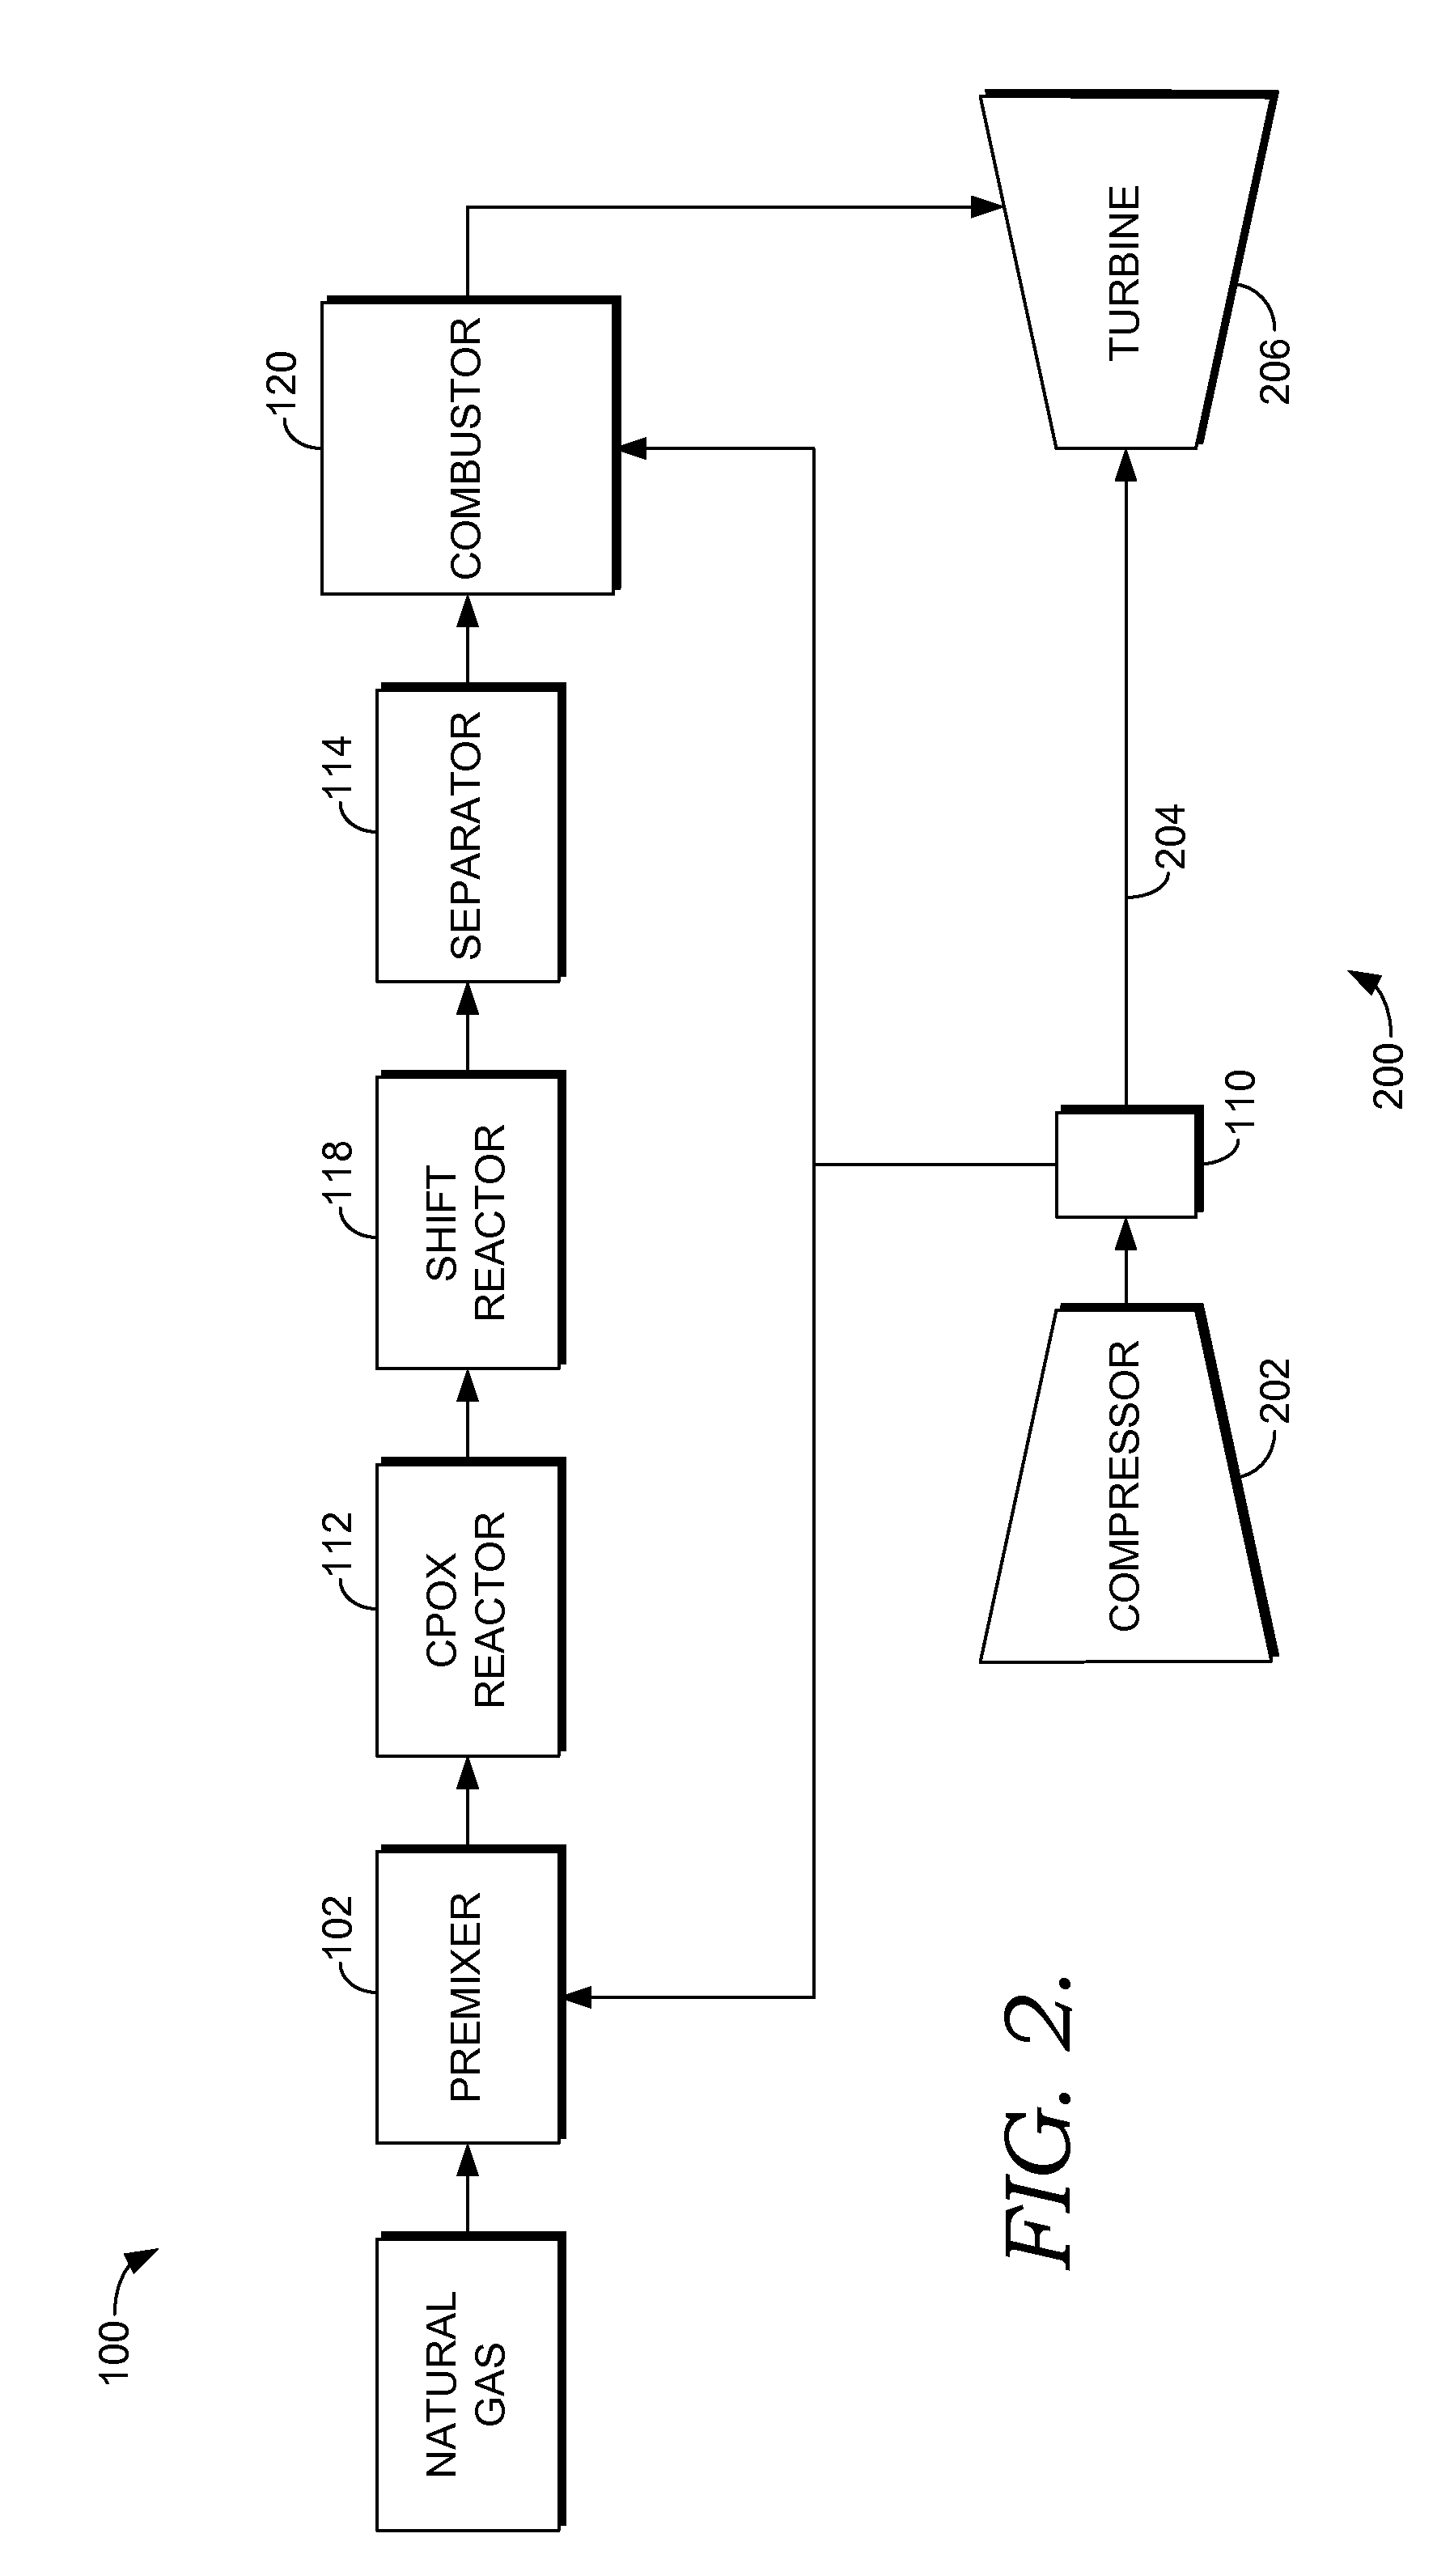 Gas turbine integrated with fuel catalytic partial oxidation